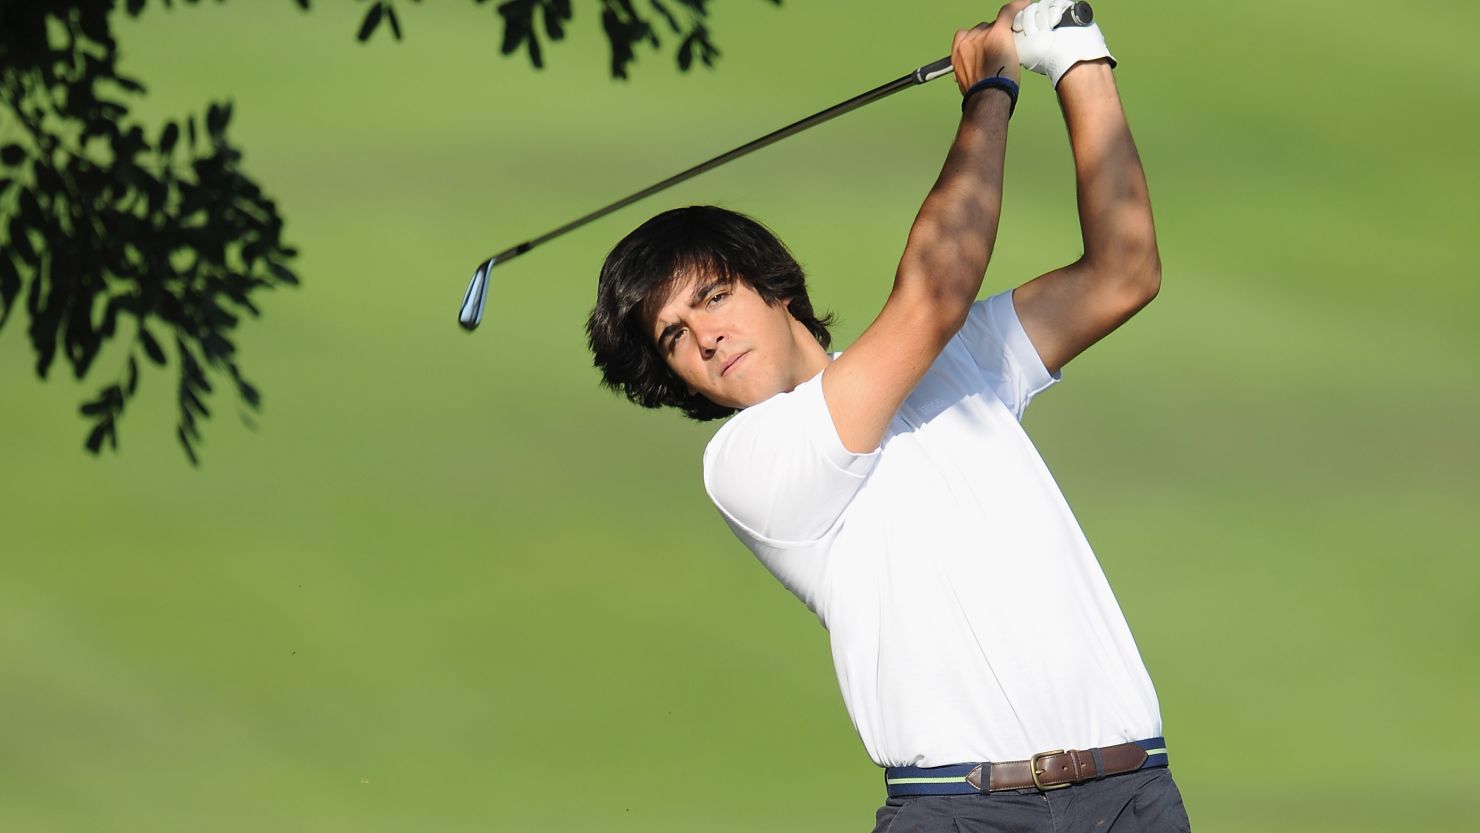 Javier Ballesteros competed in his first professional tournament Thursday, at the Sant Cugat course in Catalunya